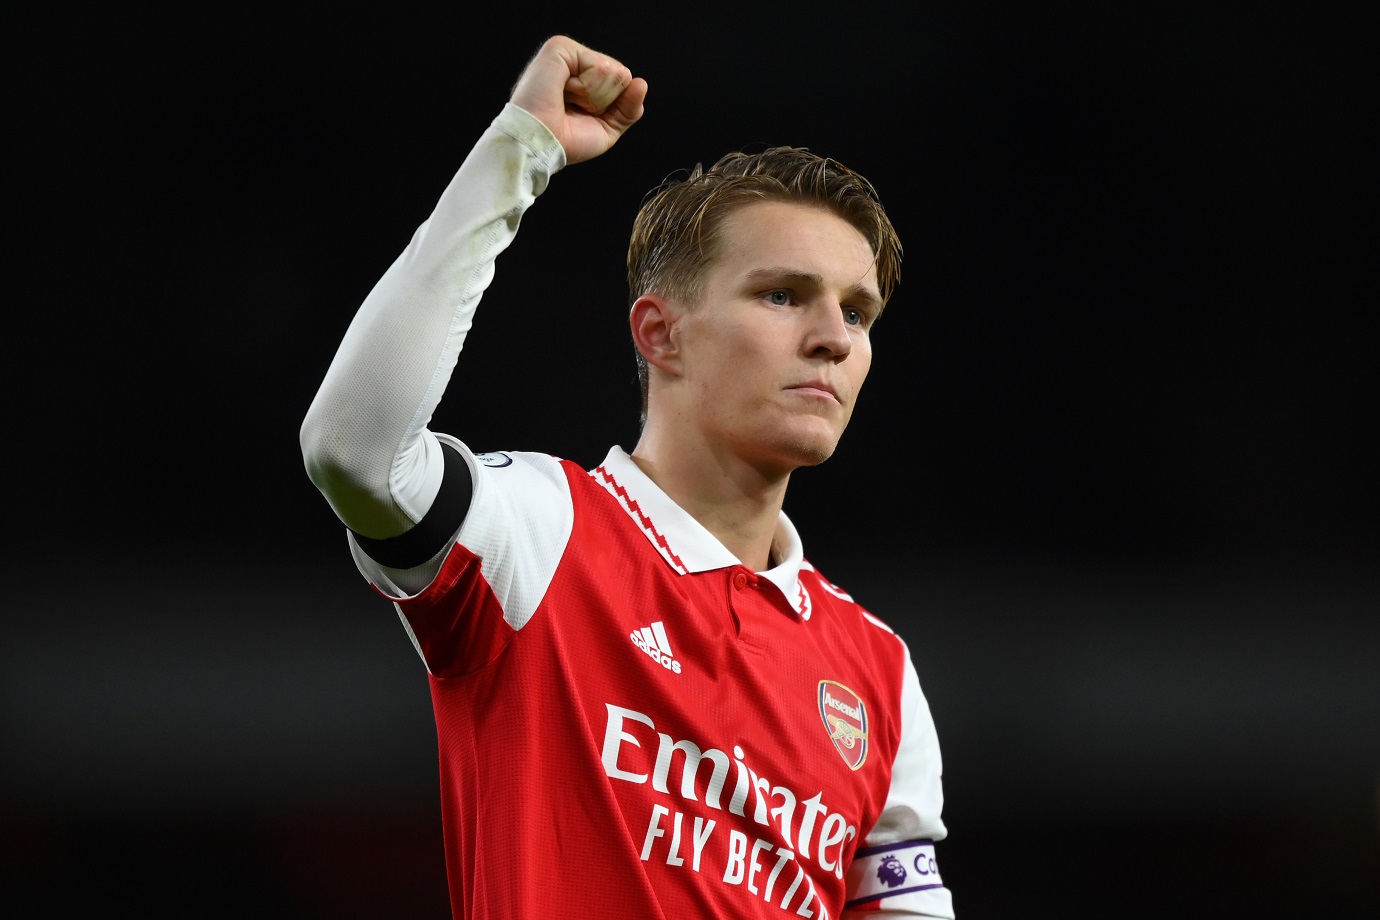 Arsenal youngster banned for improper conduct